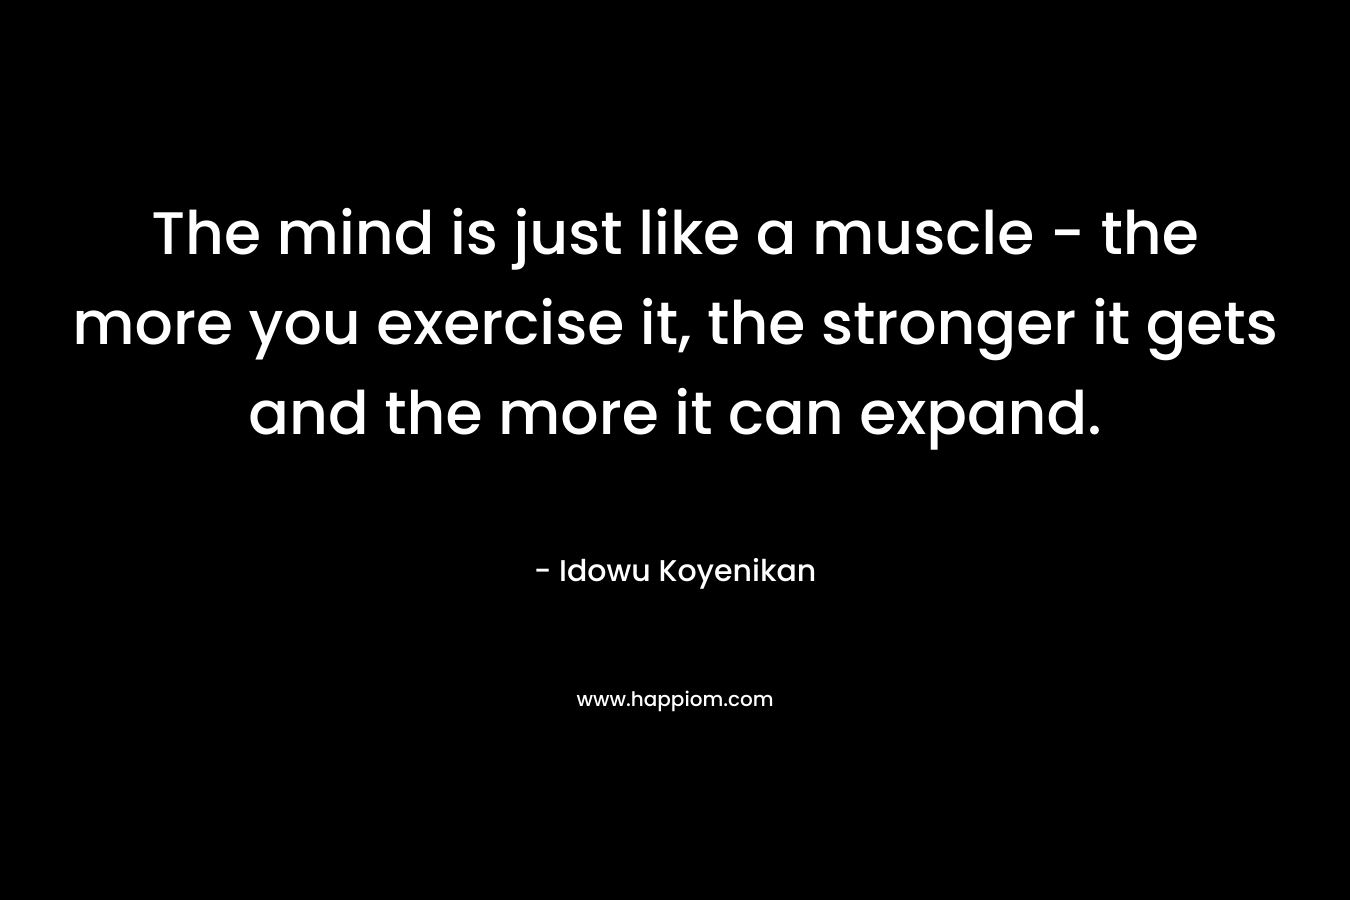 The mind is just like a muscle - the more you exercise it, the stronger it gets and the more it can expand.